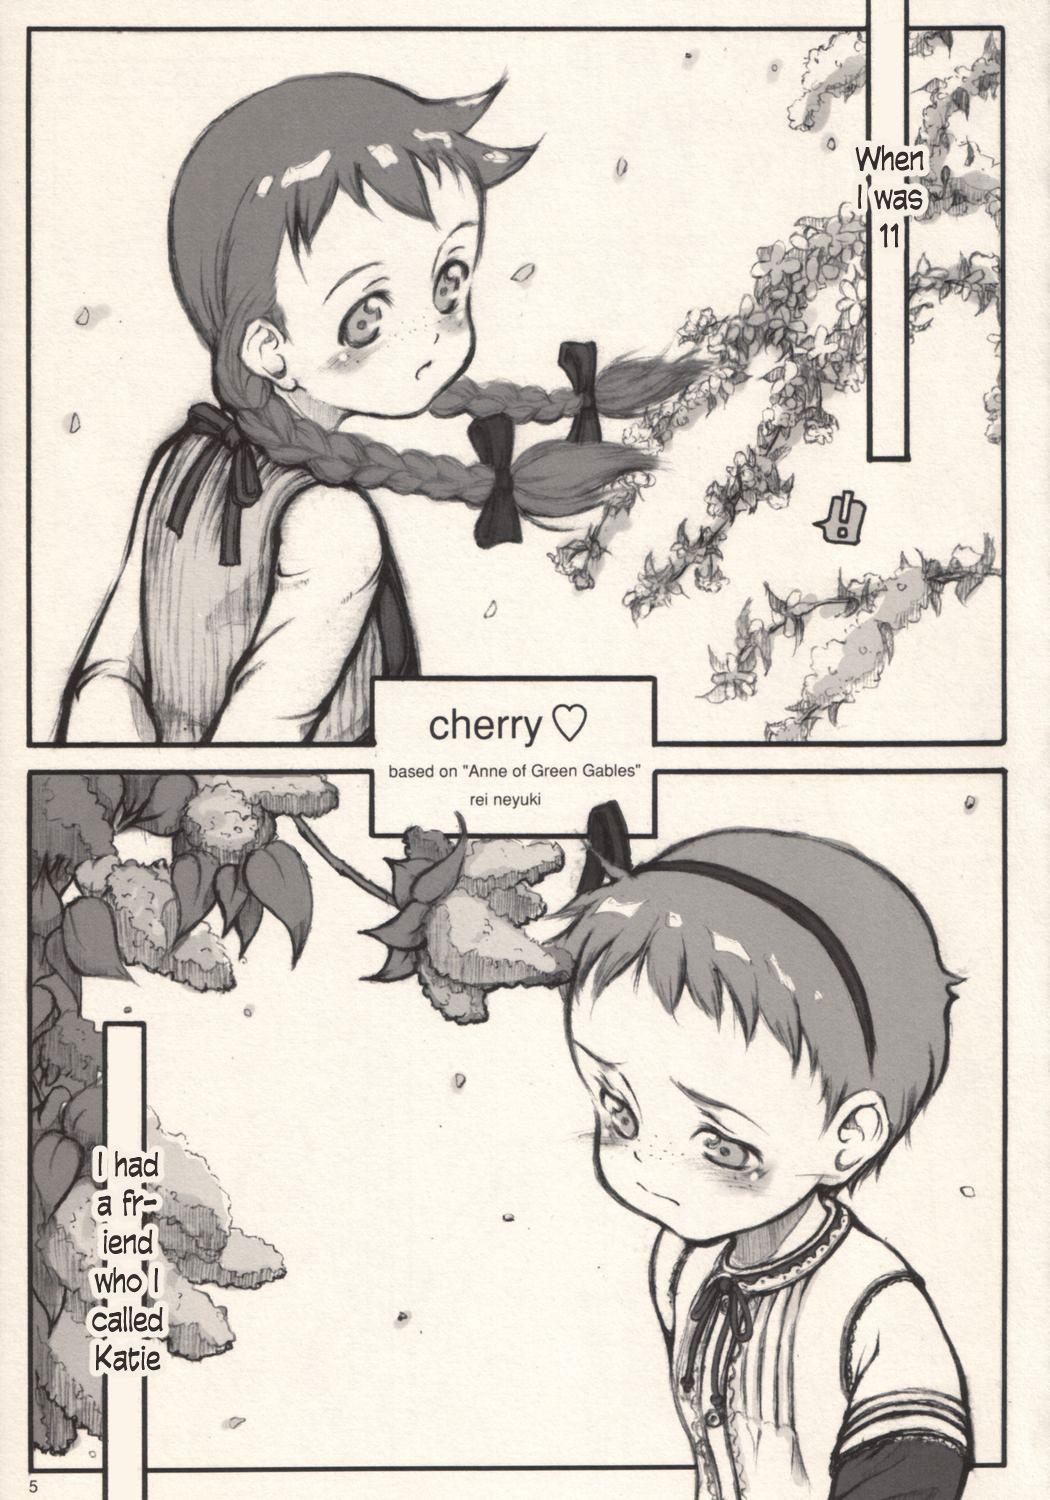 Leche cherry - World masterpiece theater Anne of green gables | akage no anne Facefuck - Page 4